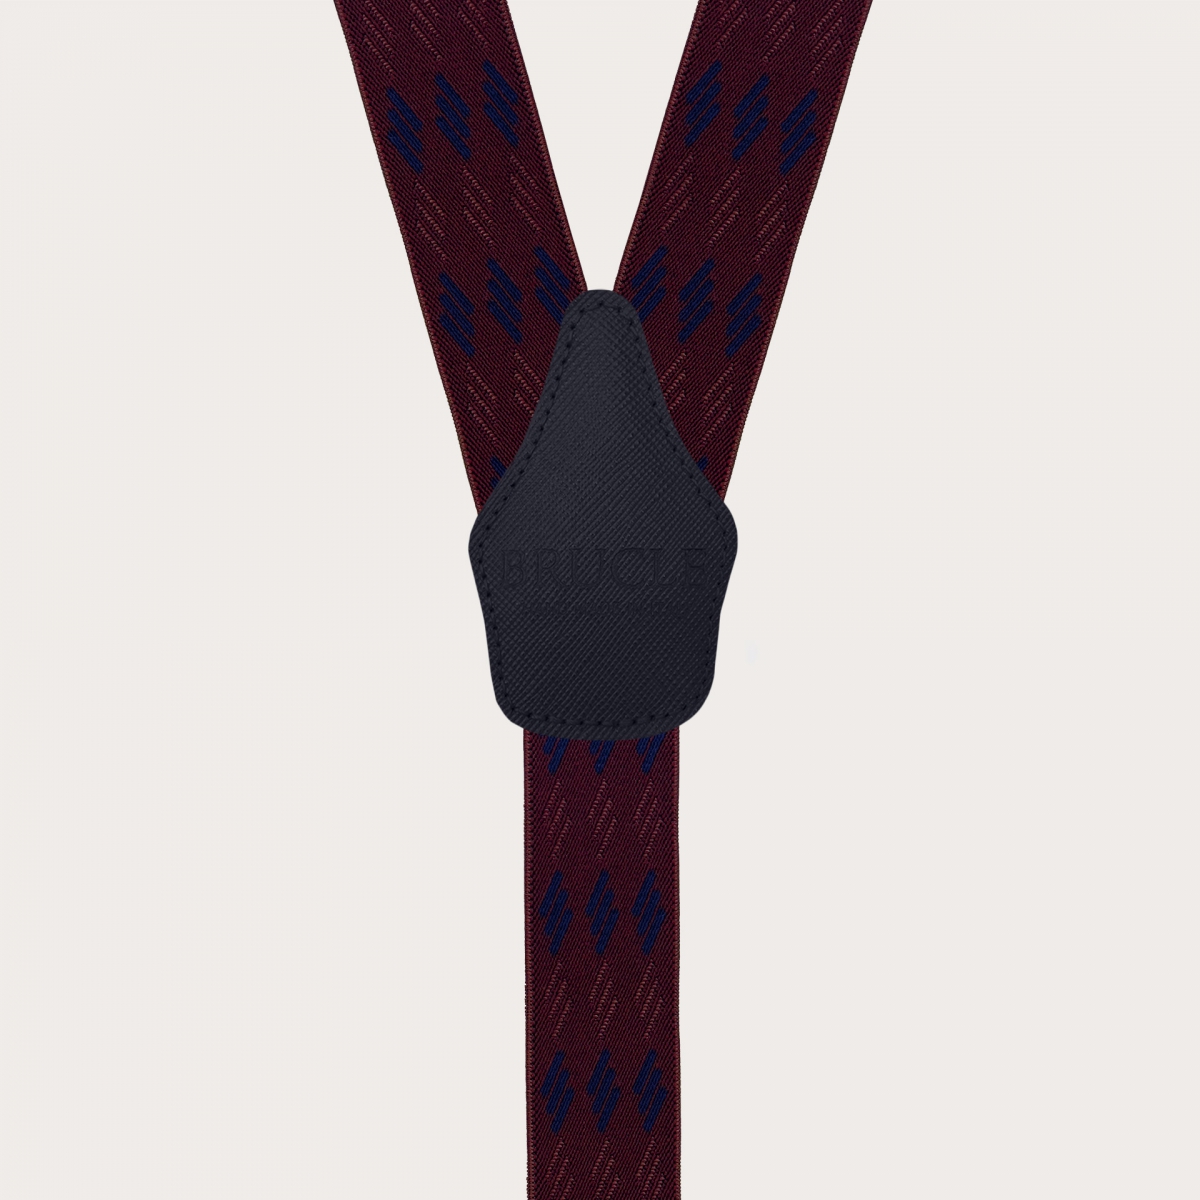 Elastic suspenders with a geometric pattern, burgundy and blue, dual-use